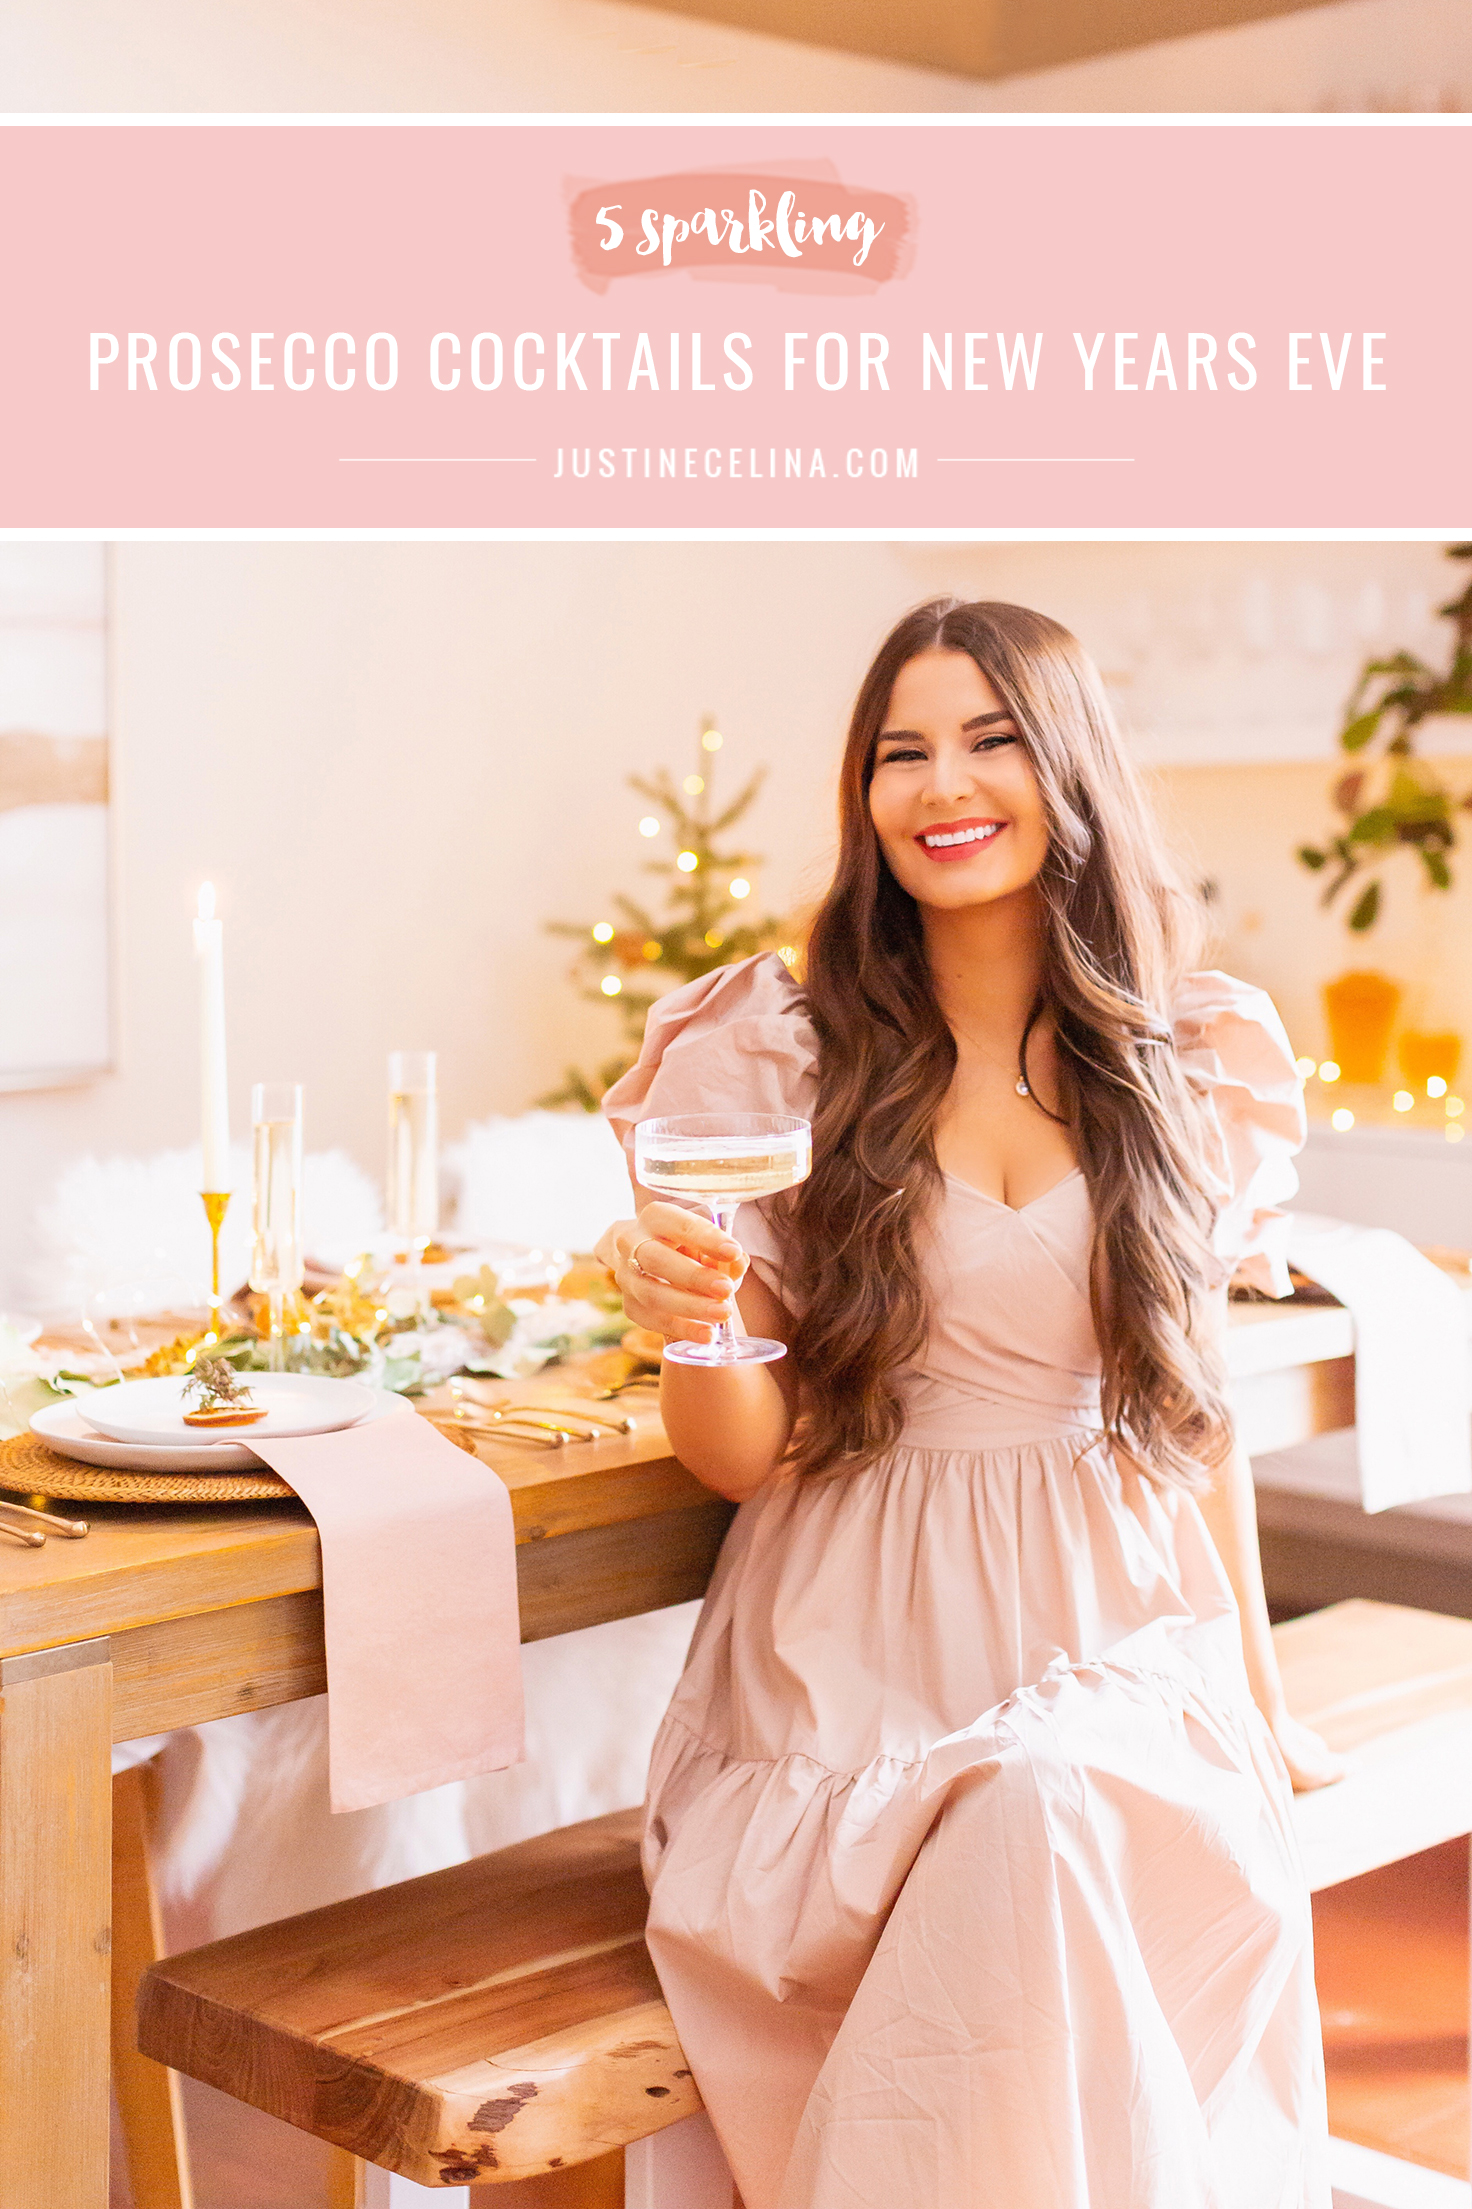 5 Sparkling Prosecco Cocktails for New Years Eve | Smiling brunette woman sitting at a holiday dining table holding a glass of Prosecco | The Best Prosecco, Champagne, Cava and Sparkling Wine Cocktails for New Years | Big Batch New Years Eve Cocktails | New Years Eve Cocktails for a Crowd | New Years Eve at Home Ideas | NYE Cocktail Recipes | Winter cocktails | New Years Day Cocktails | New Years Eve Cocktails 2021 | Elegant NYE Cocktails | Calgary Cocktail and Lifestyle Blogger // JustineCelina.com